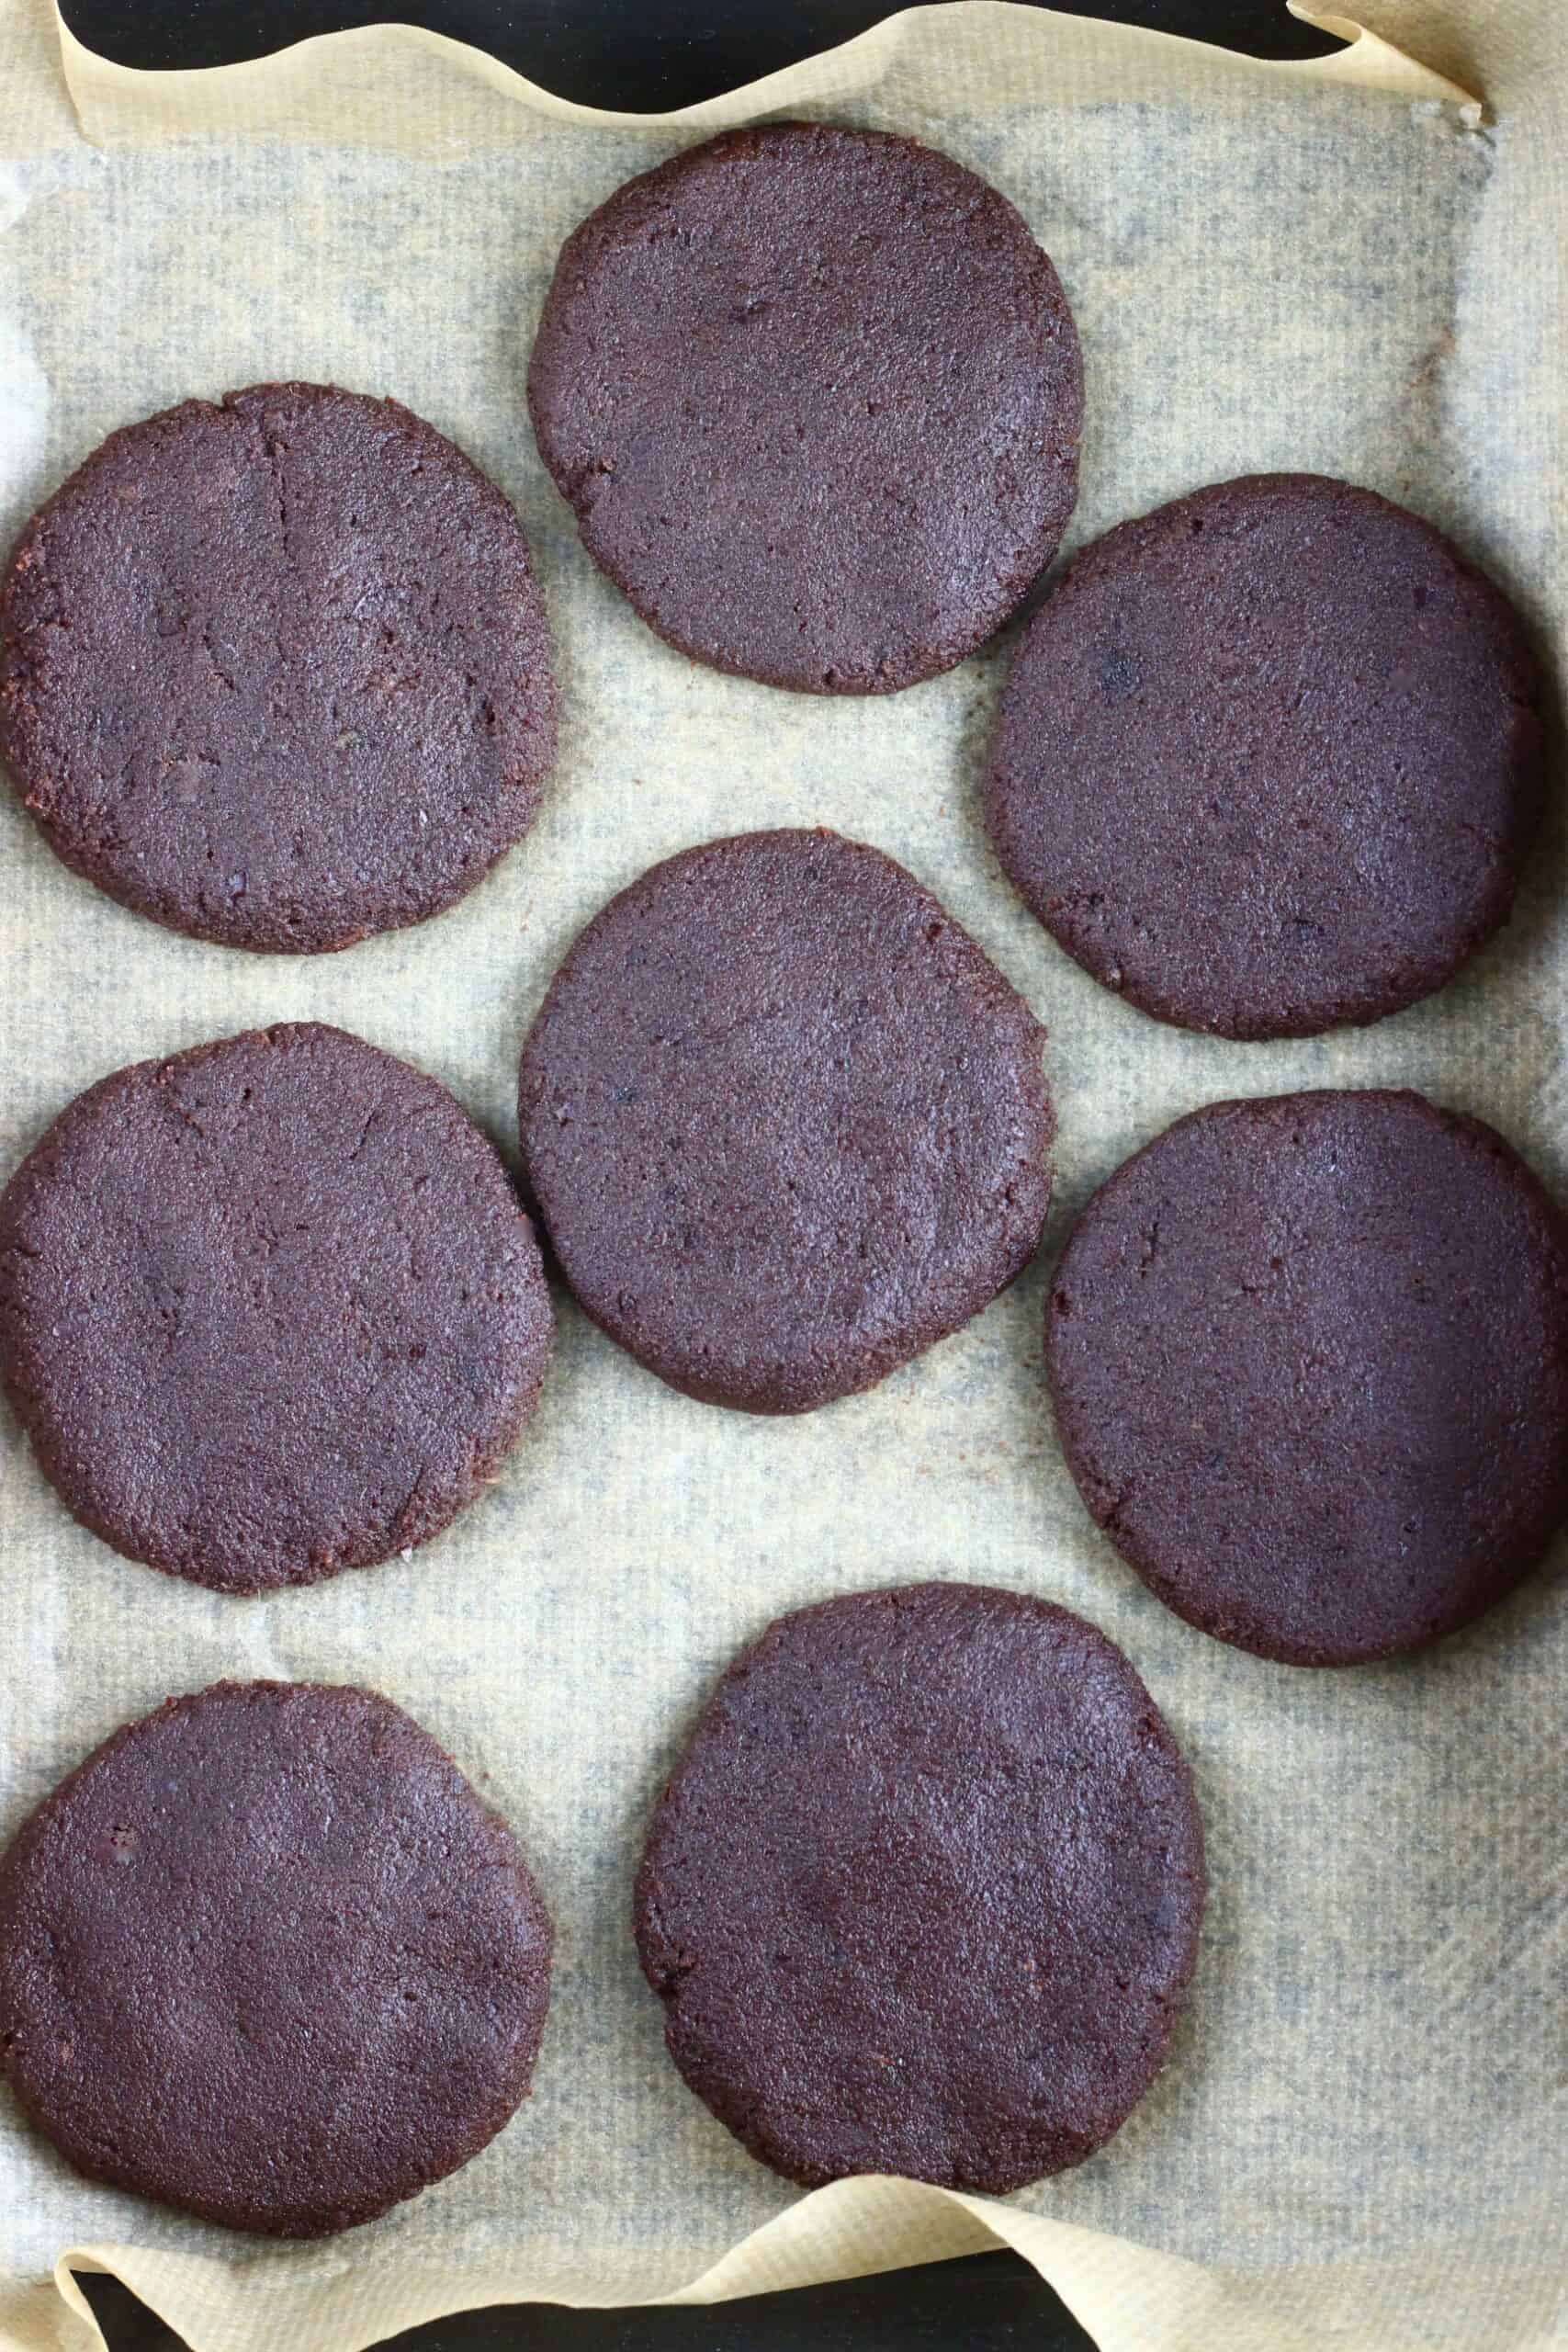 Eight raw gluten-free vegan chocolate brownie cookies on a baking tray lined with baking paper